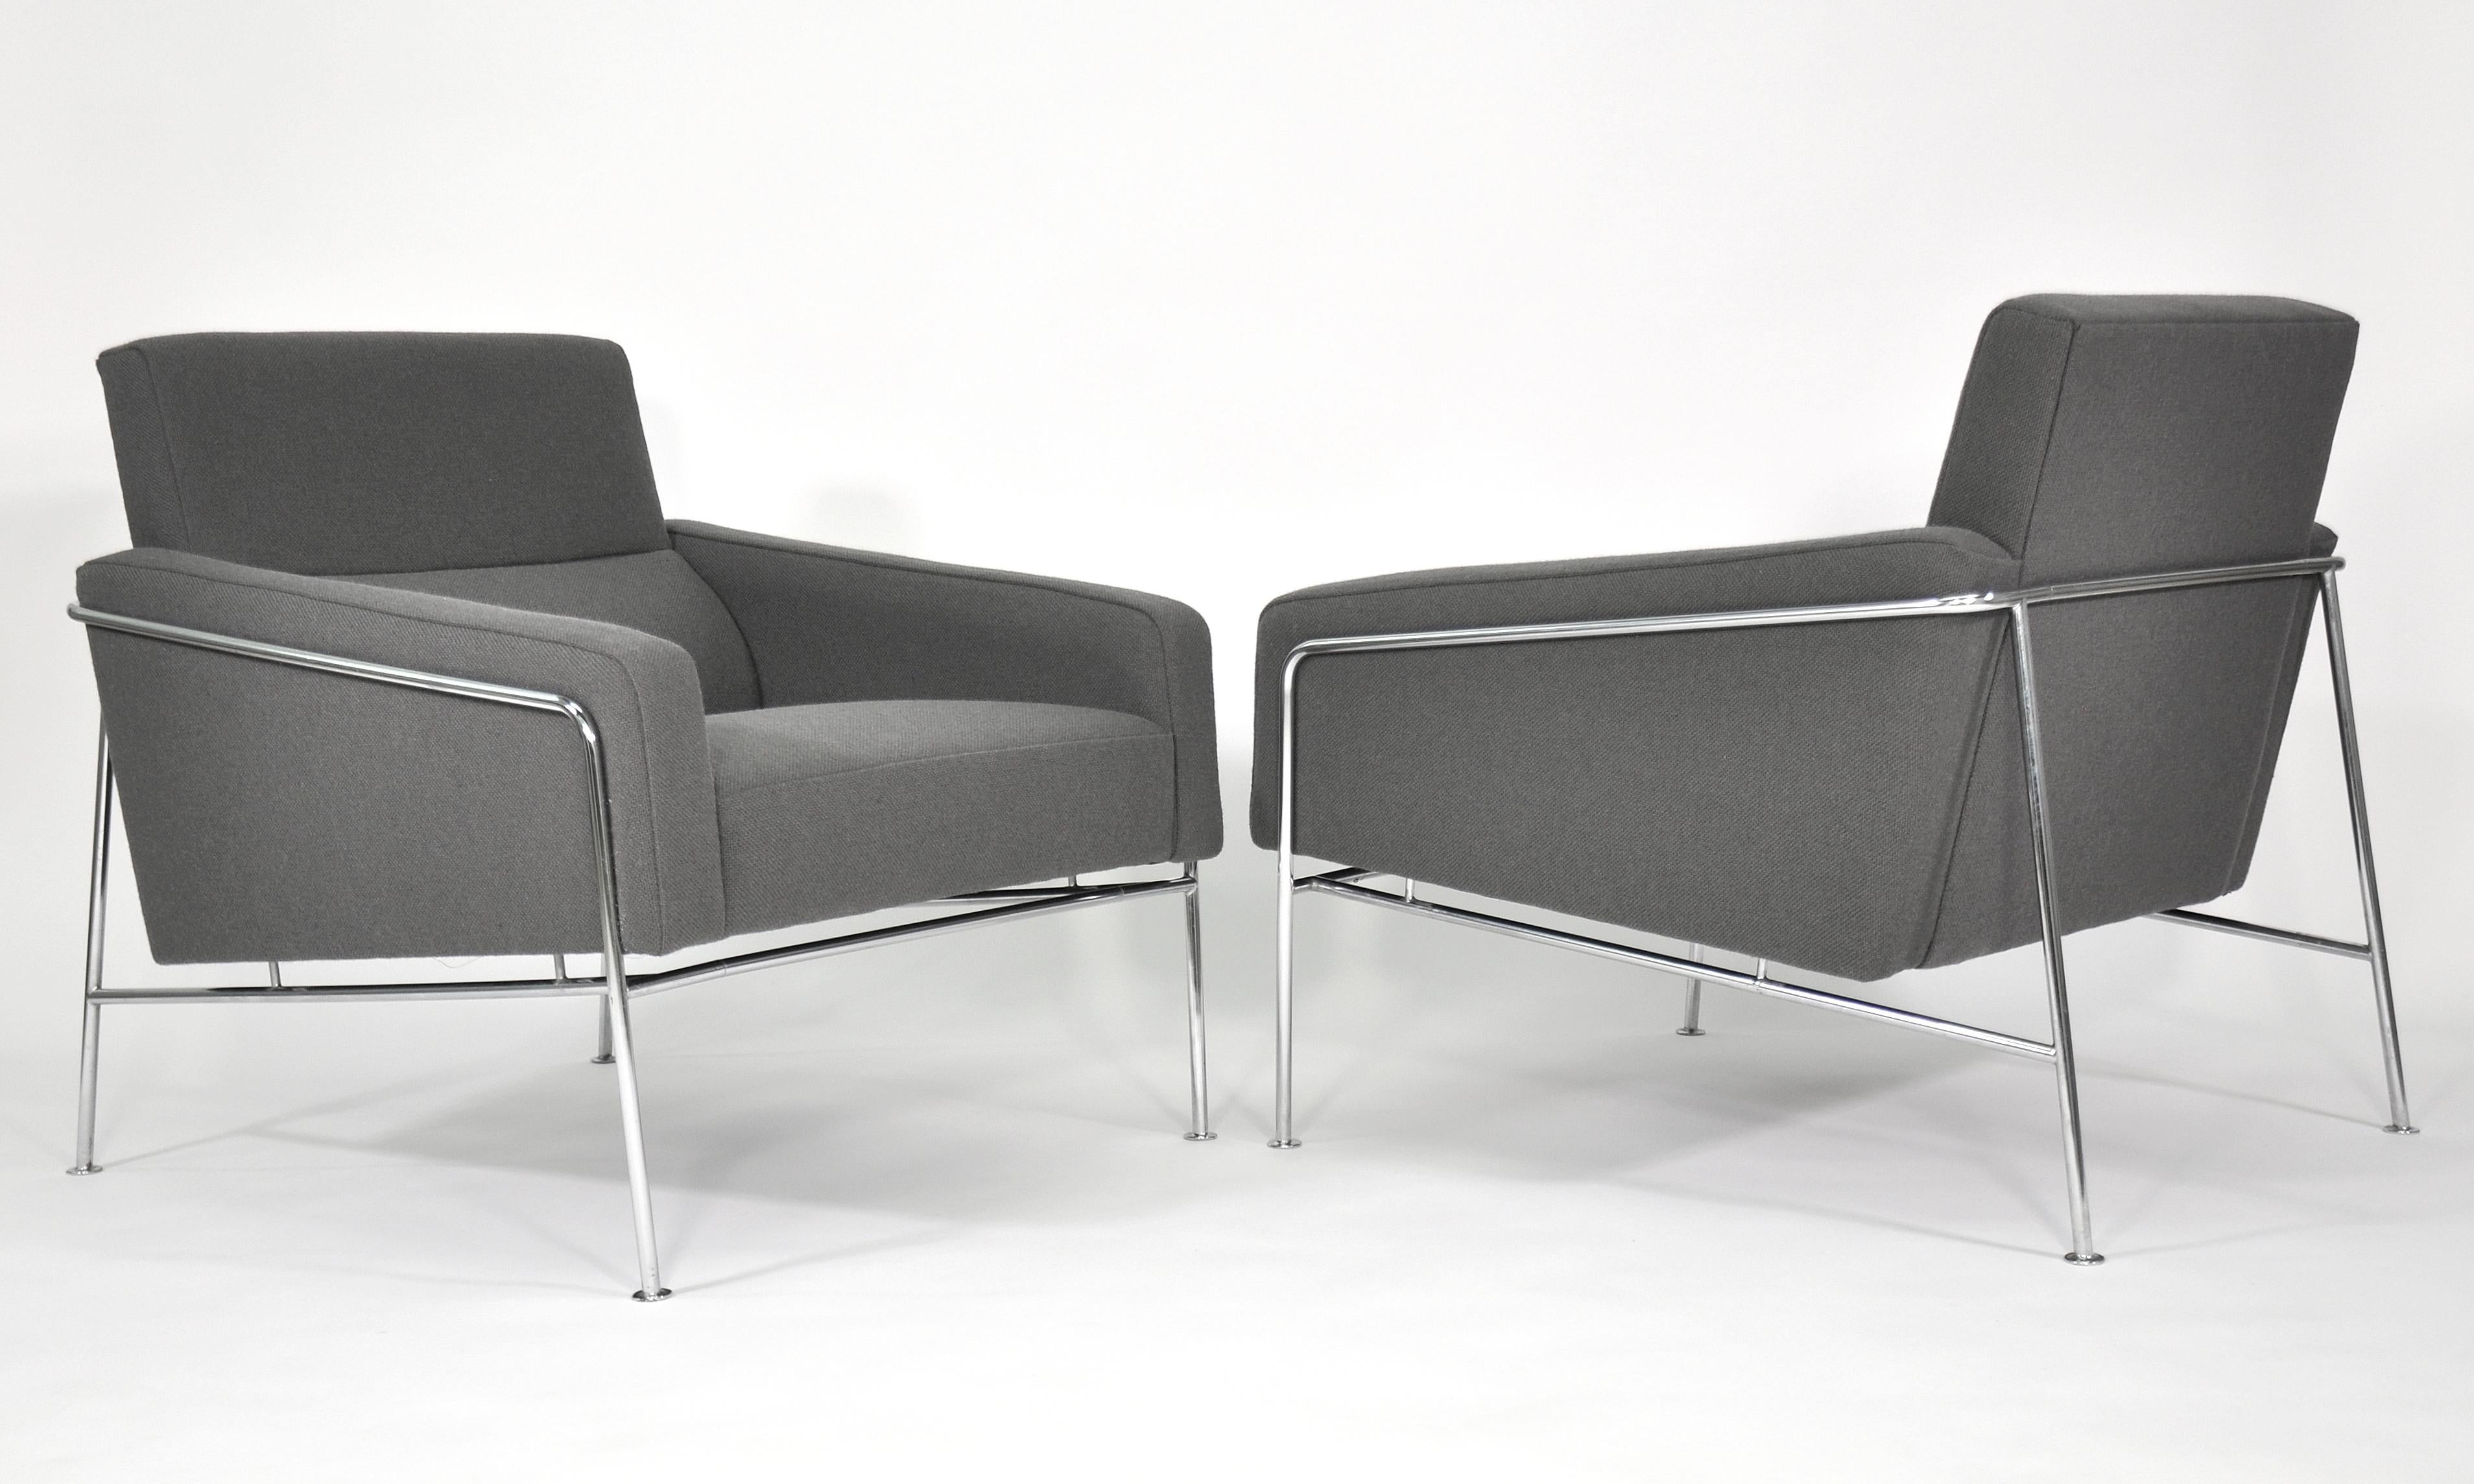 Iconic pair of vintage midcentury armchairs from the 3300 series designed by Arne Jacobsen in 1956 and manufactured in Denmark by Fritz Hansen. The bucket style seats appear to float within a thin and clean-lined chrome frame. The chairs feature a